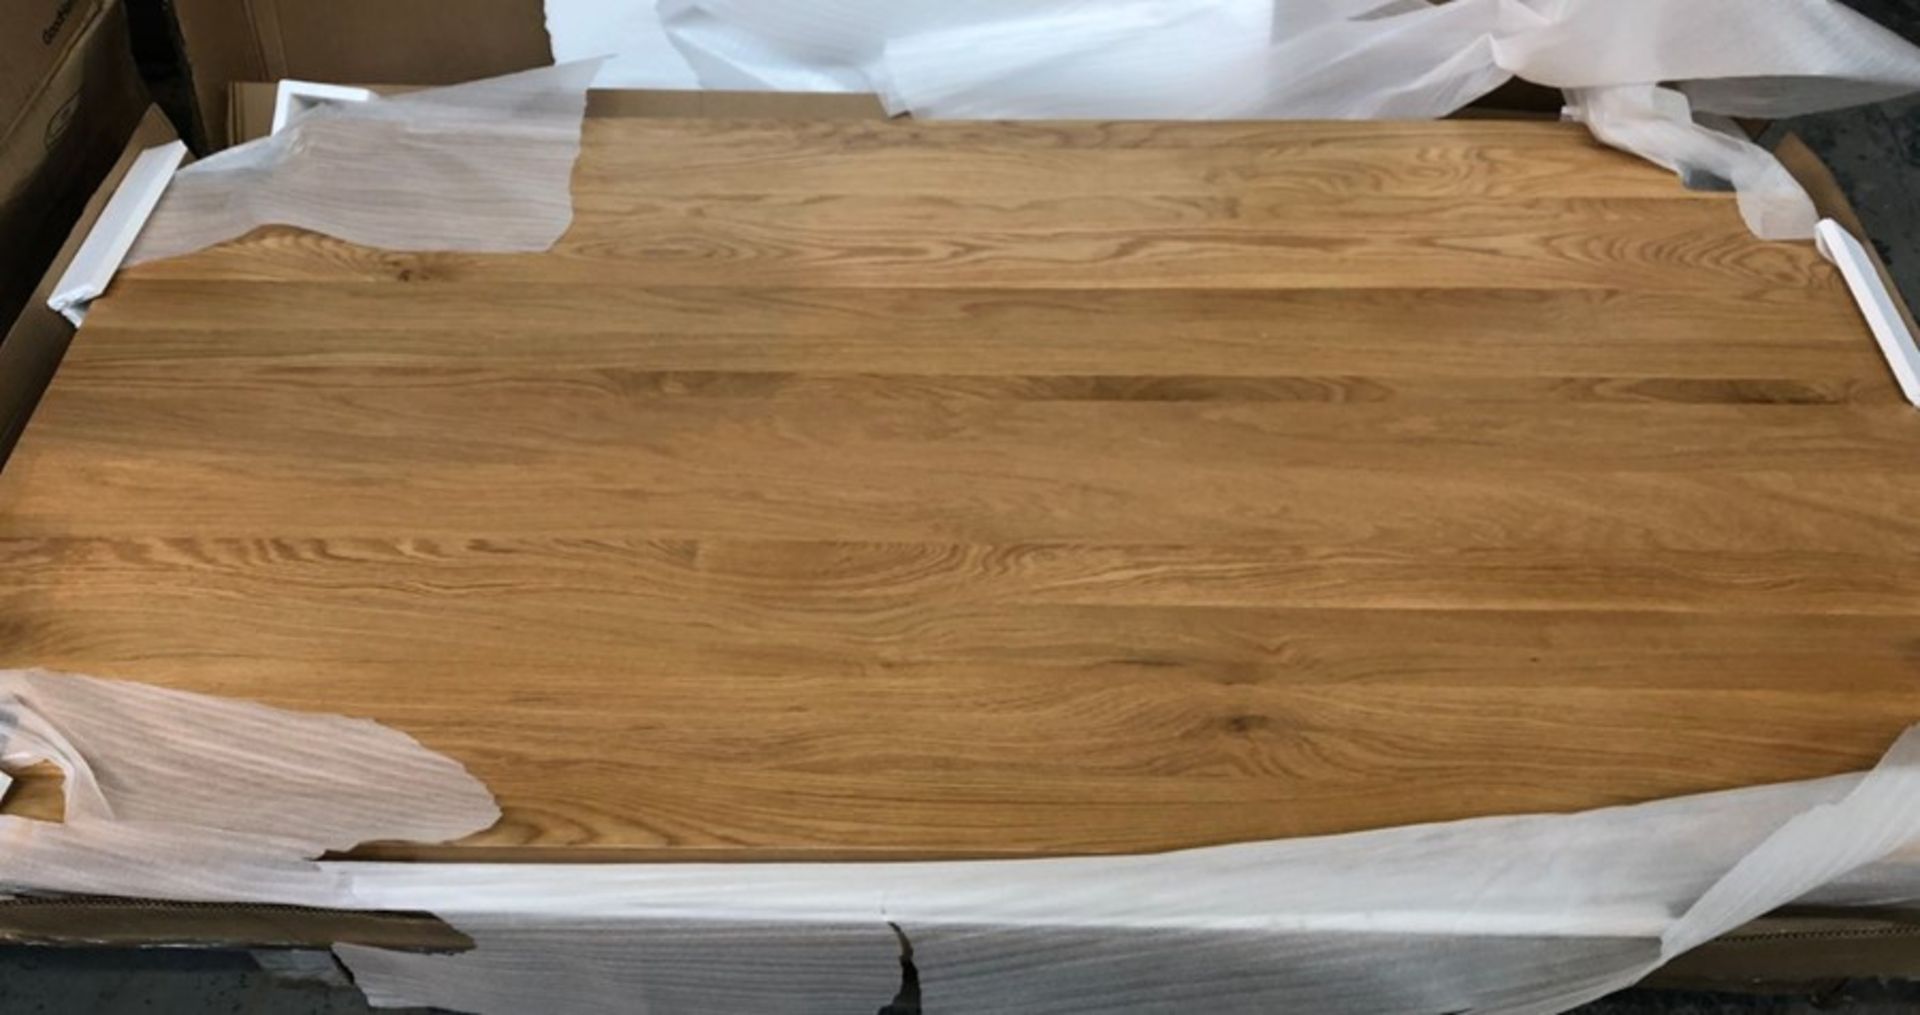 1 X BOXED CHUNKY SOLID WOOD DINING TABLE WITH LEGS / CONDITION REPORT: BOXED, NO APPARENT VISIBLE